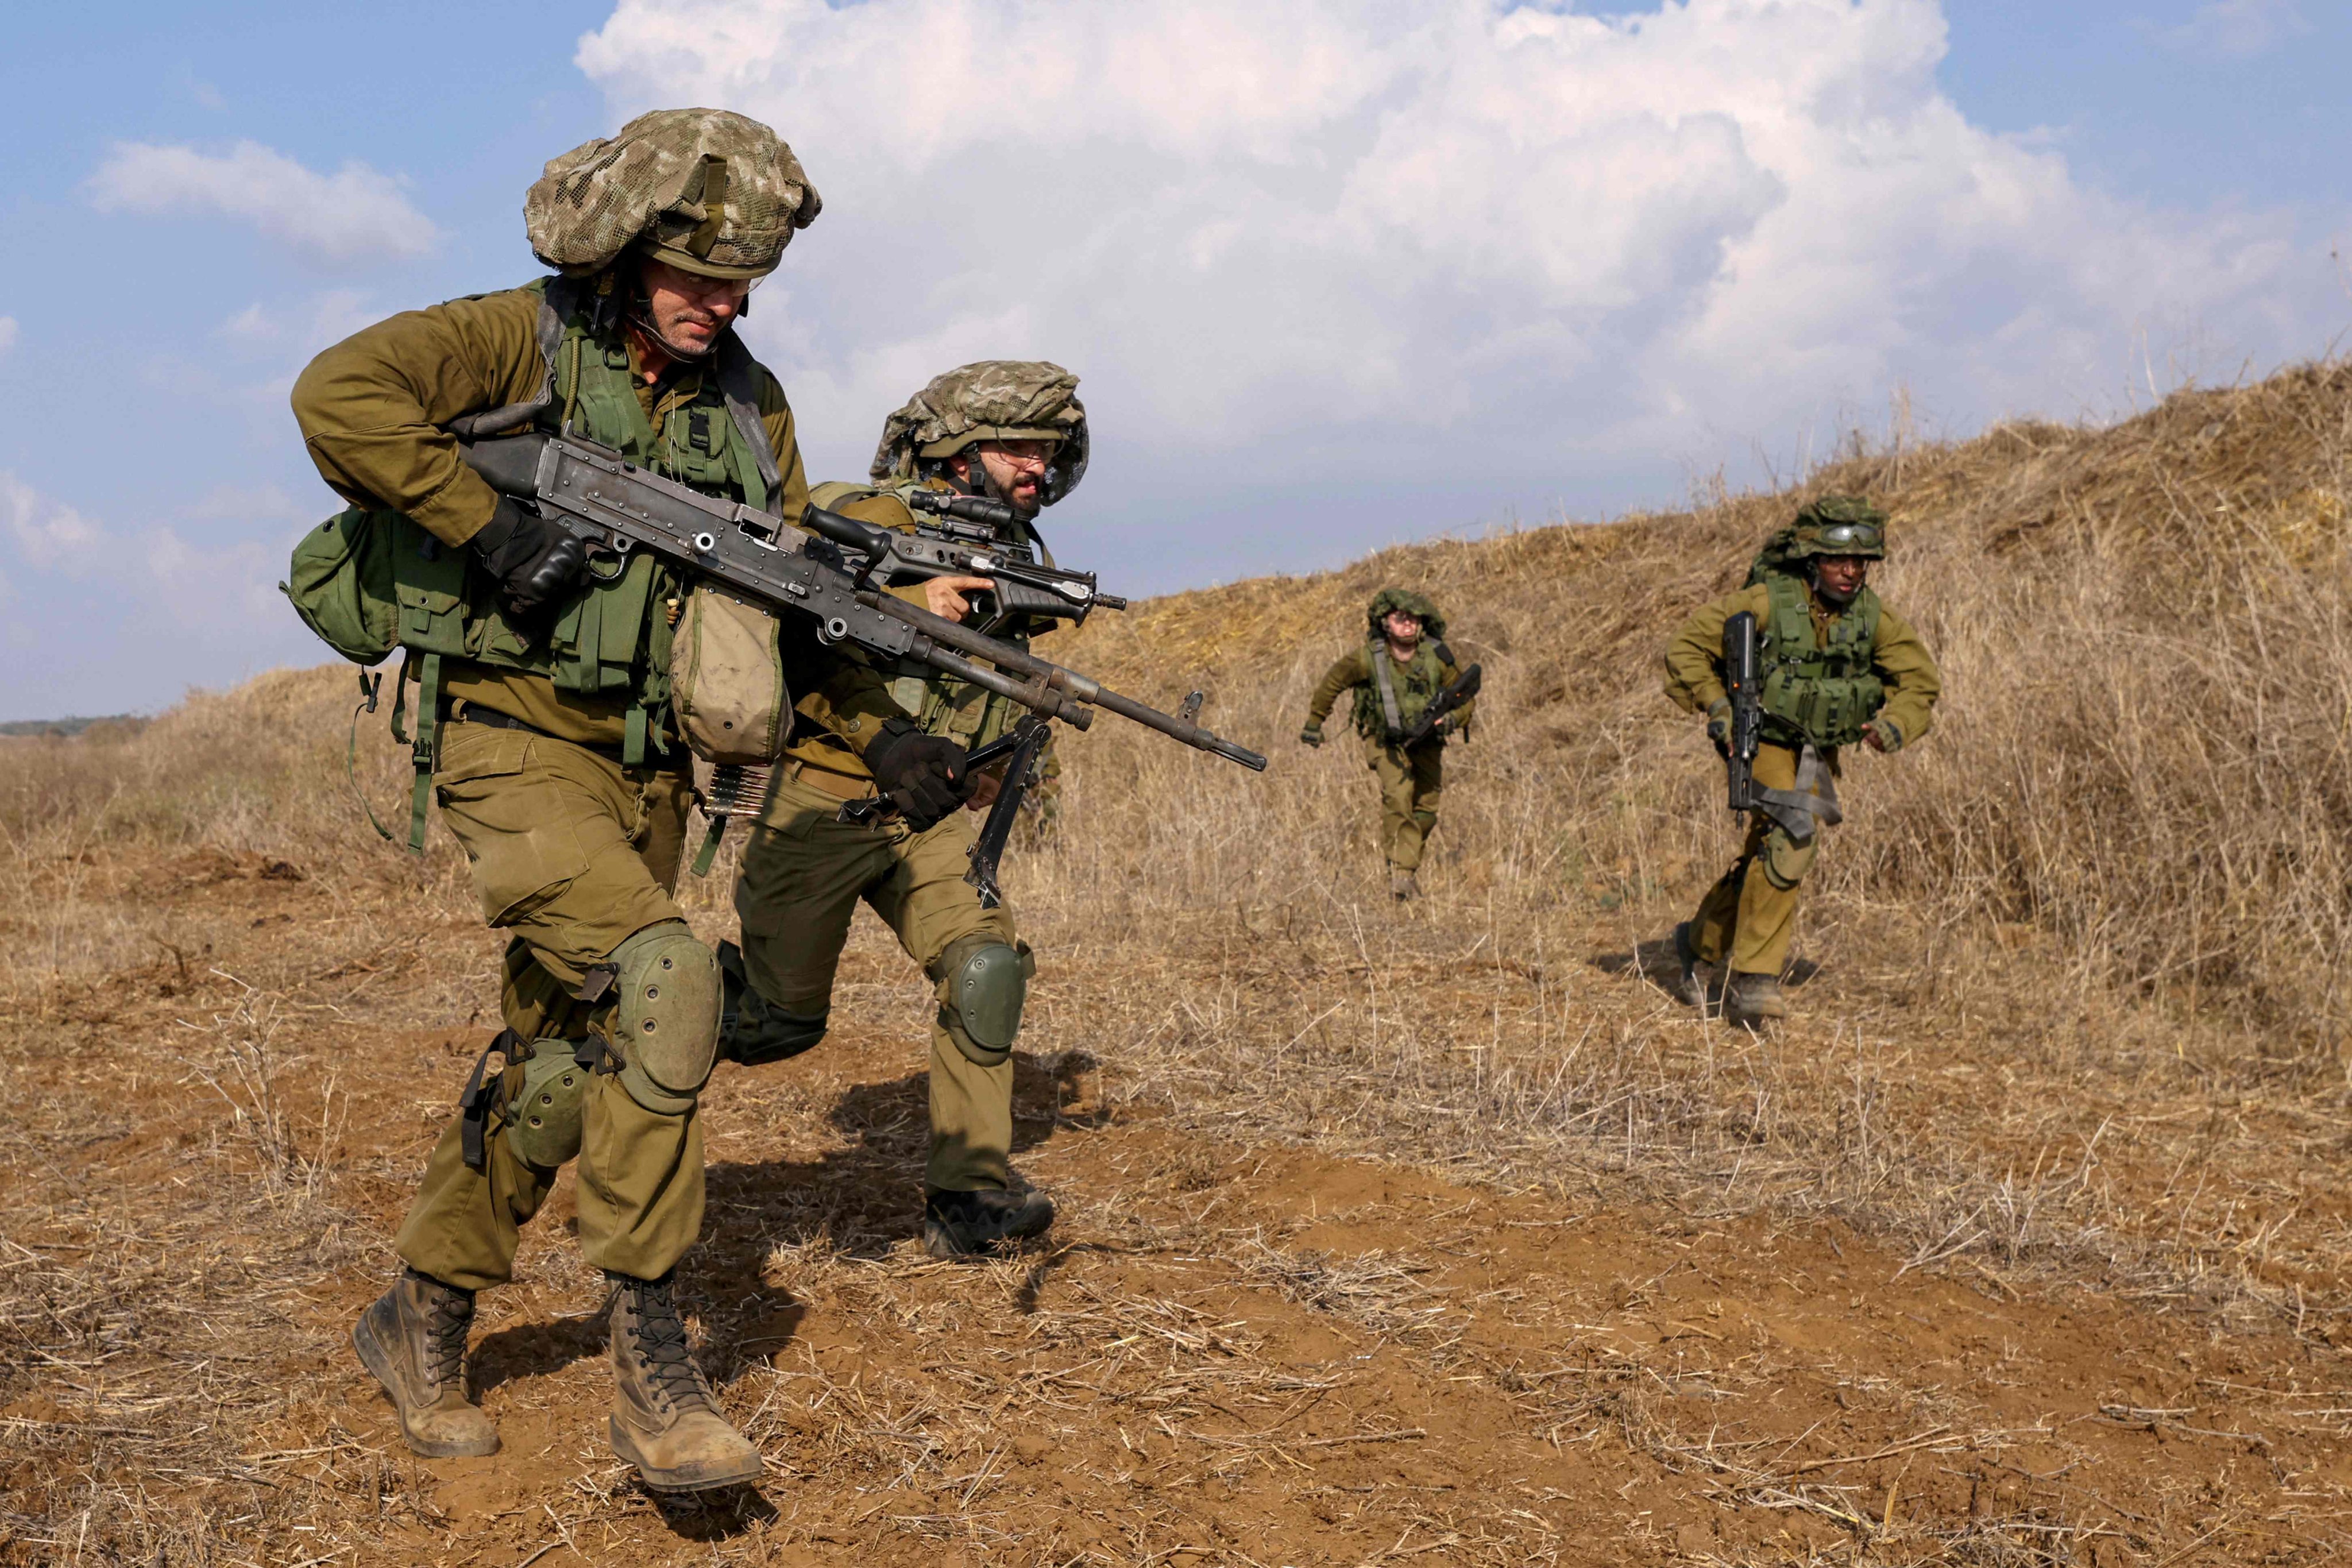 Israeli soldiers take part in an military exercise in the Israel-annexed Golan Heights near the Lebanon border on Wednesday. Lebanon’s southern border has seen tit-for-tat exchanges, mainly between Israel and Iran-backed Hezbollah. Photo: AFP